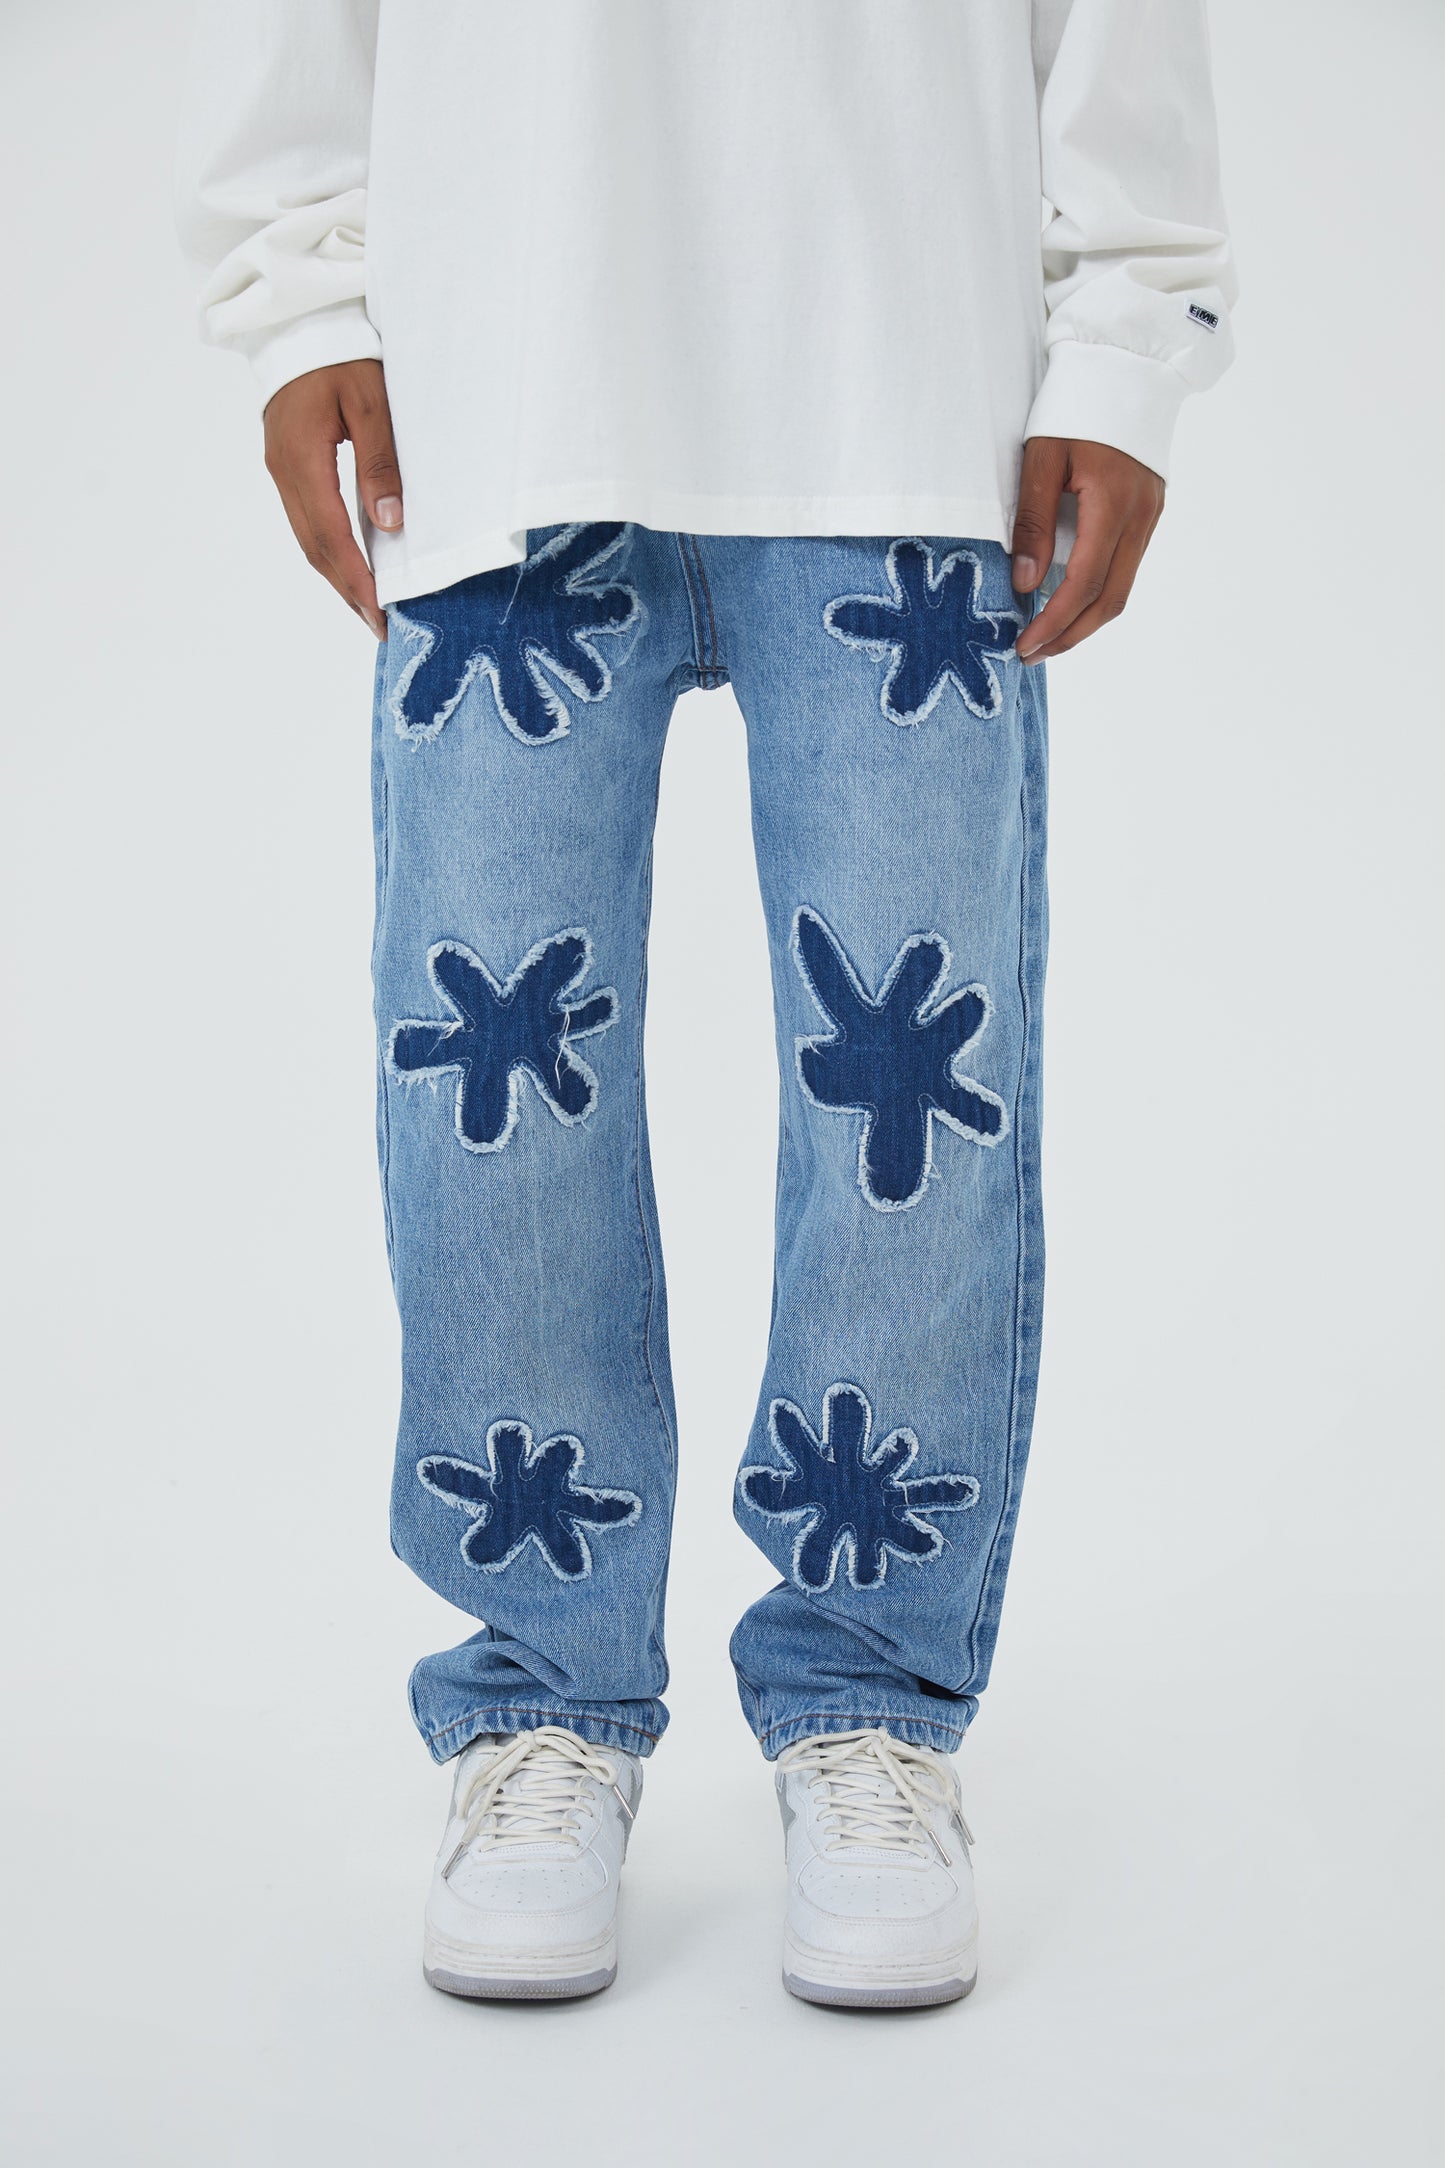 LUCKY LEAF JEANS PANTS